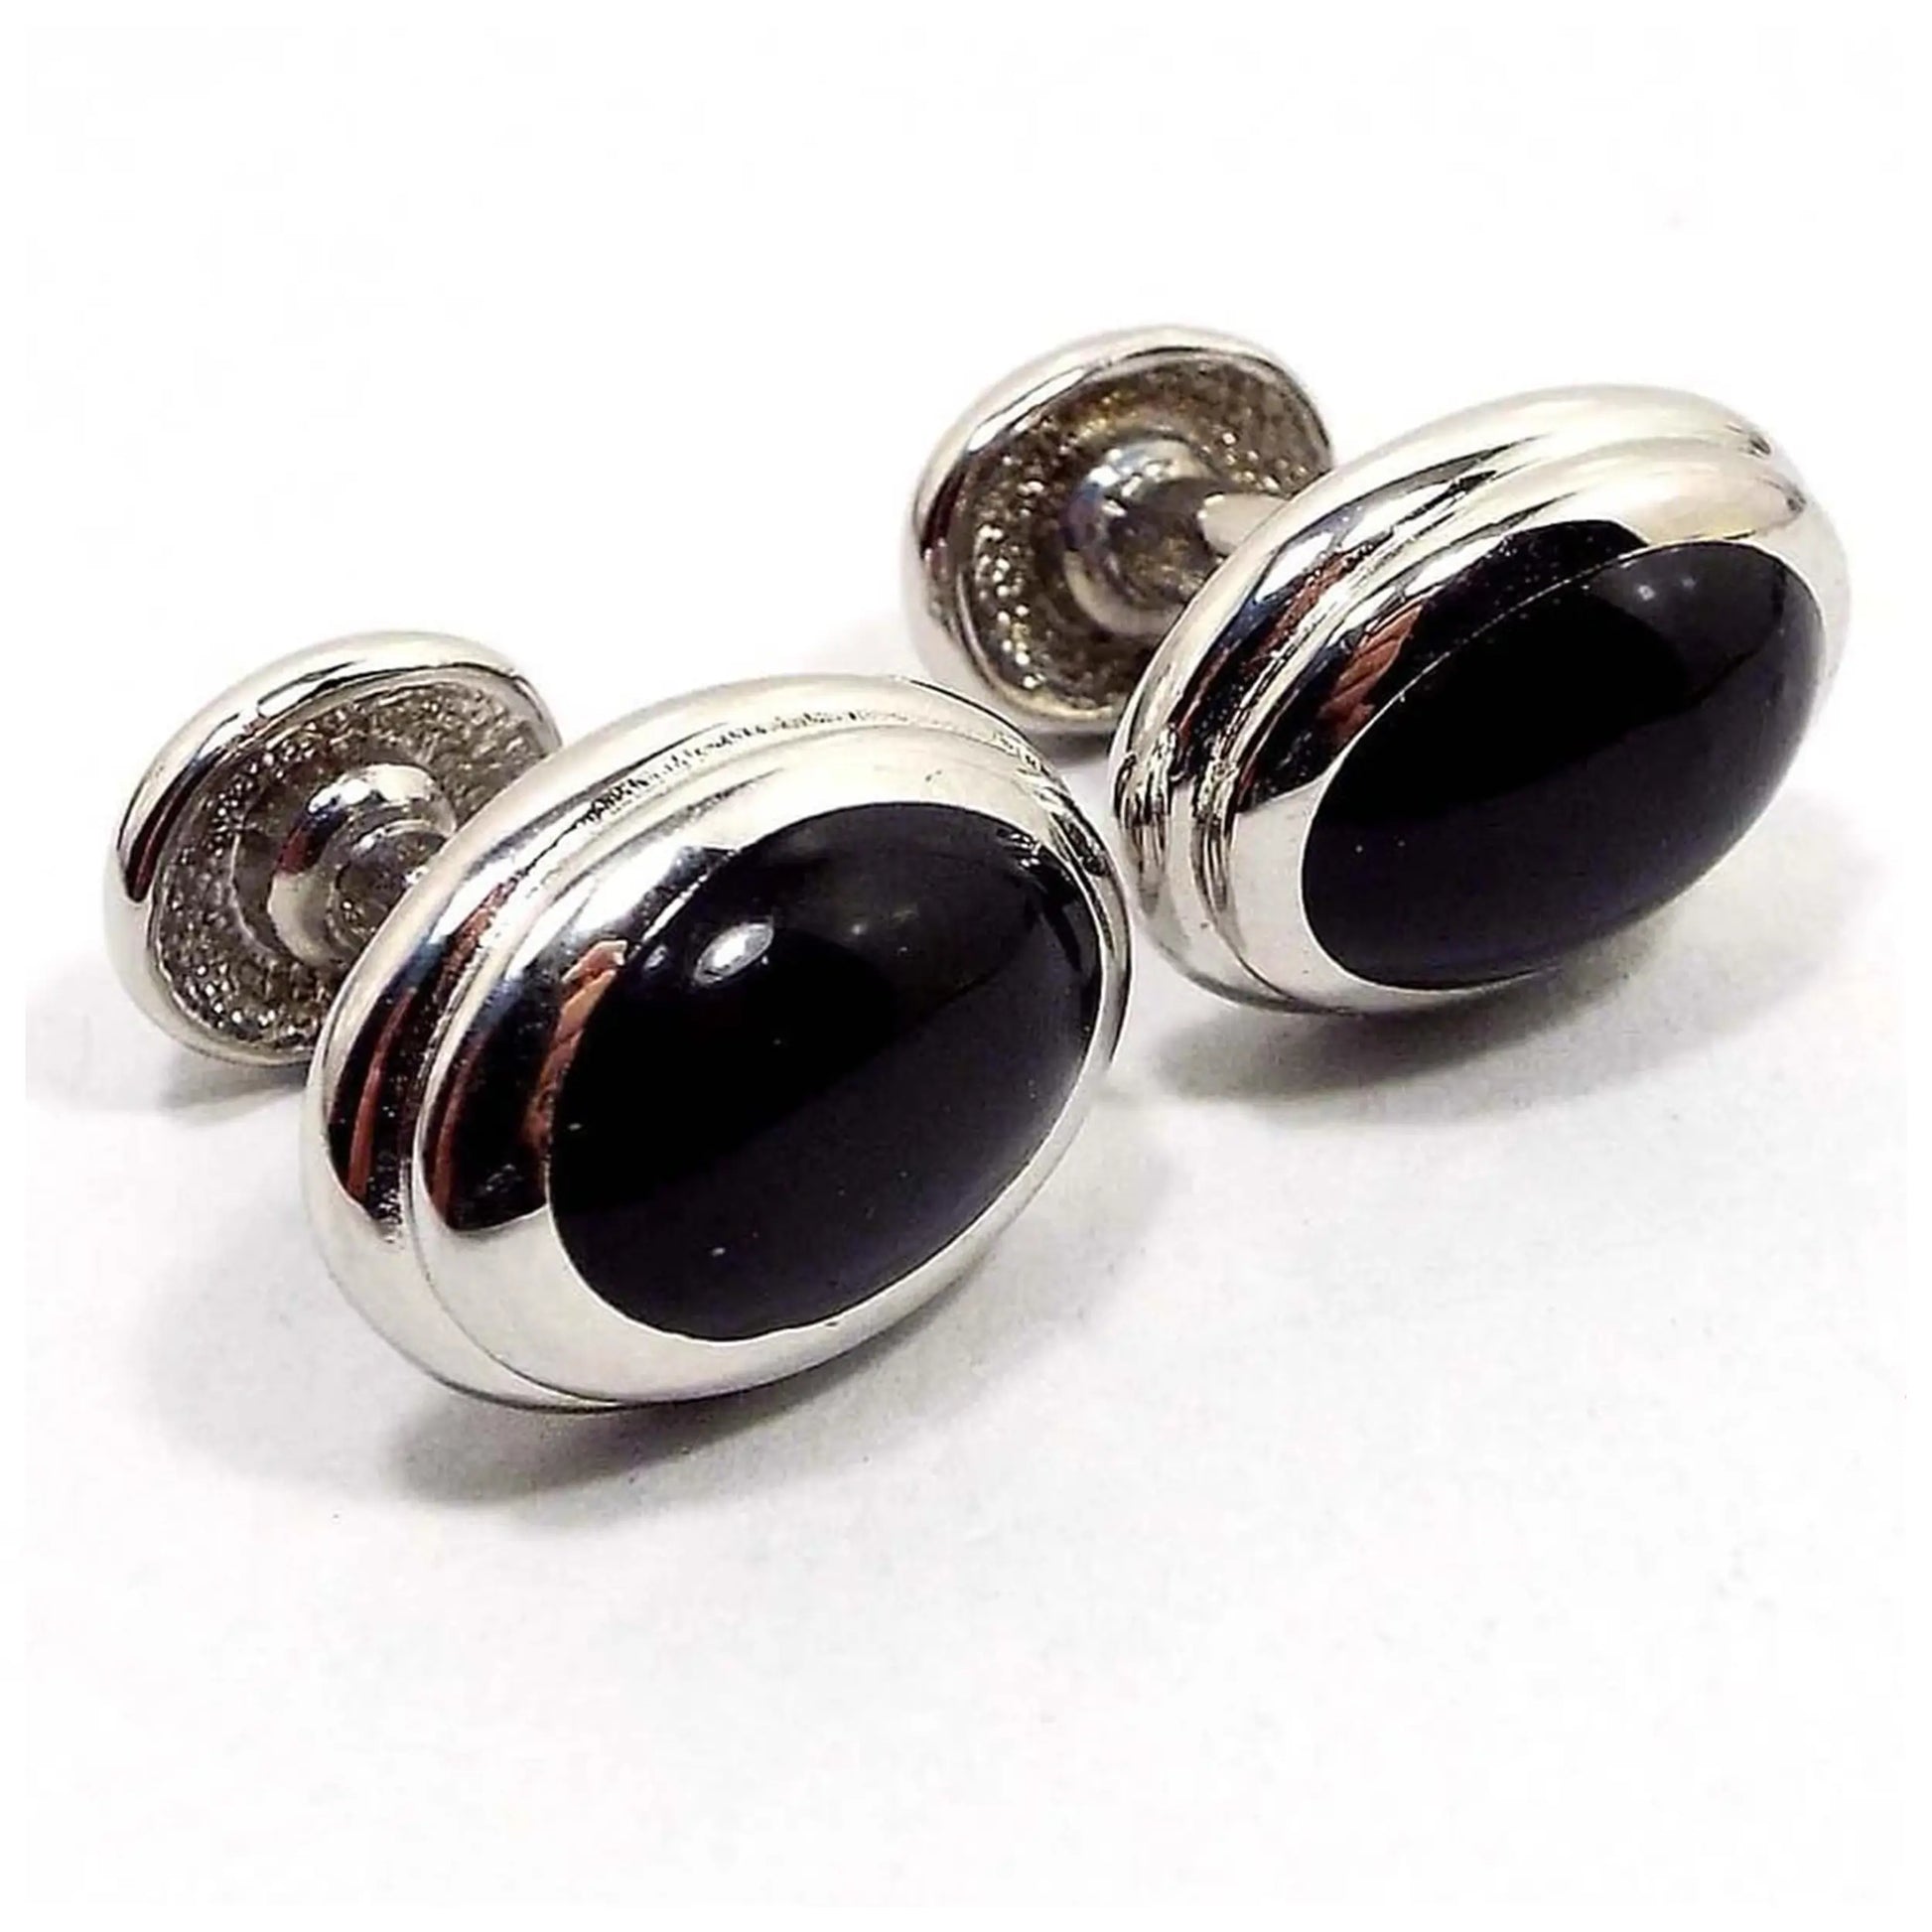 Angled view of the Mid Century vintage bean back cufflinks. The metal is gold tone in color. They are oval in shape and have black plastic fronts.